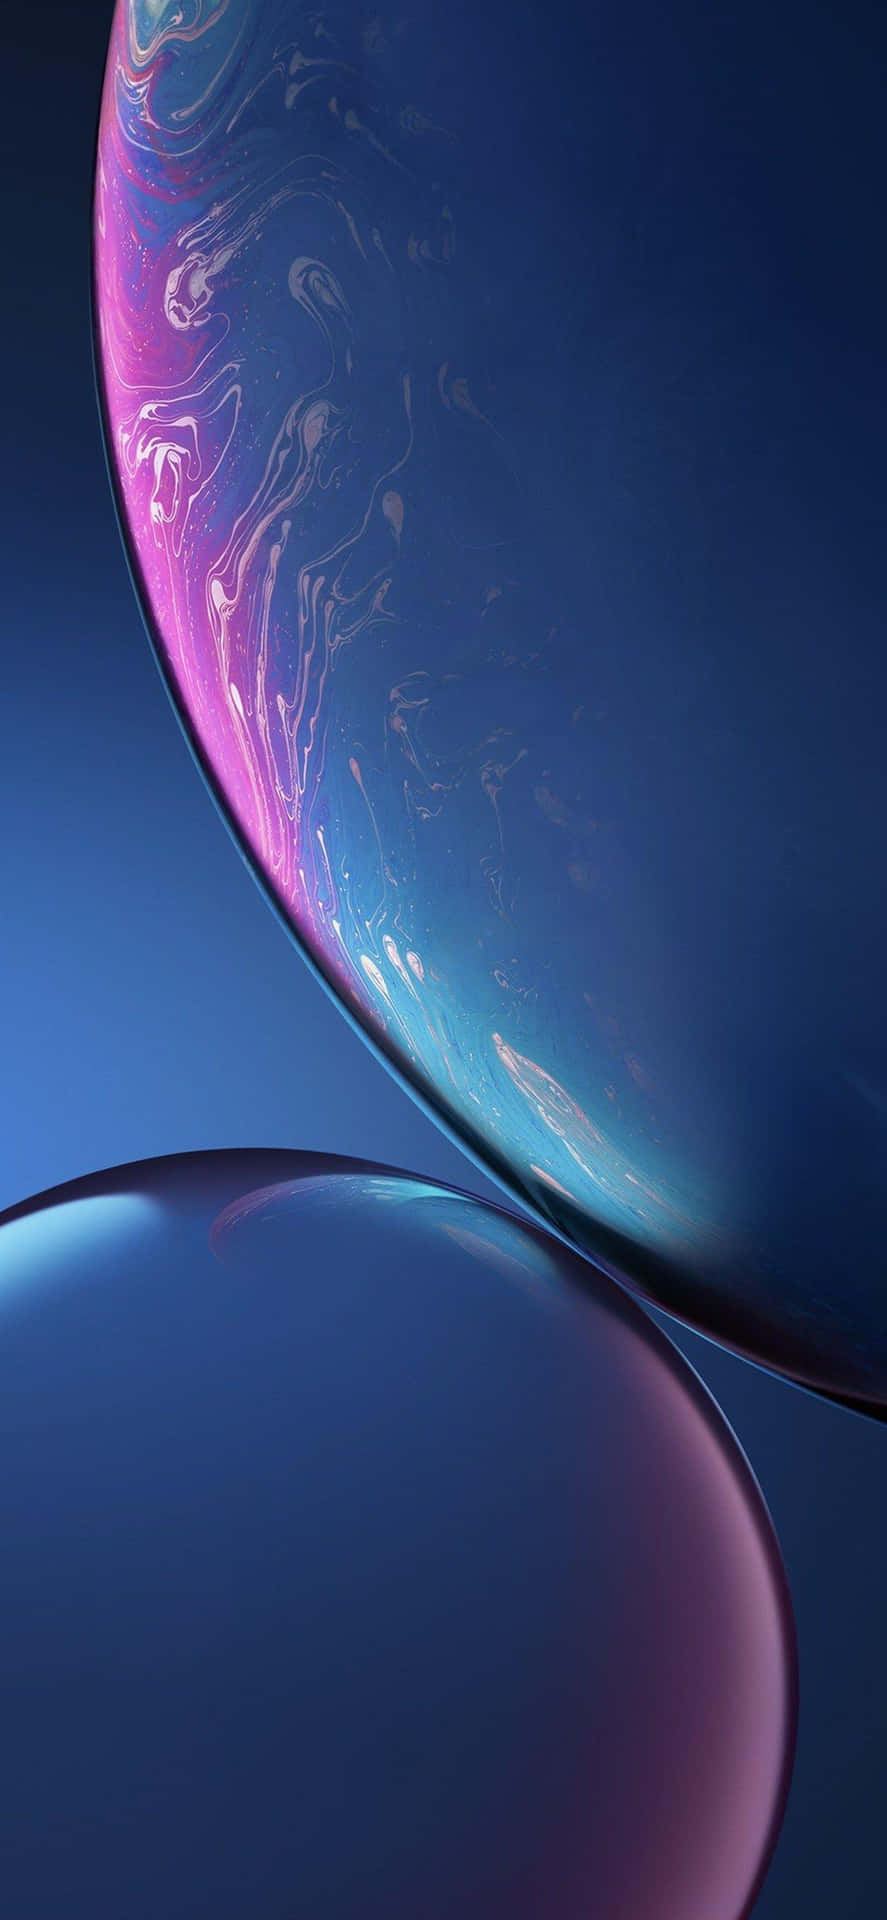 Make the most of every moment with the Apple iPhone XS Max. Wallpaper